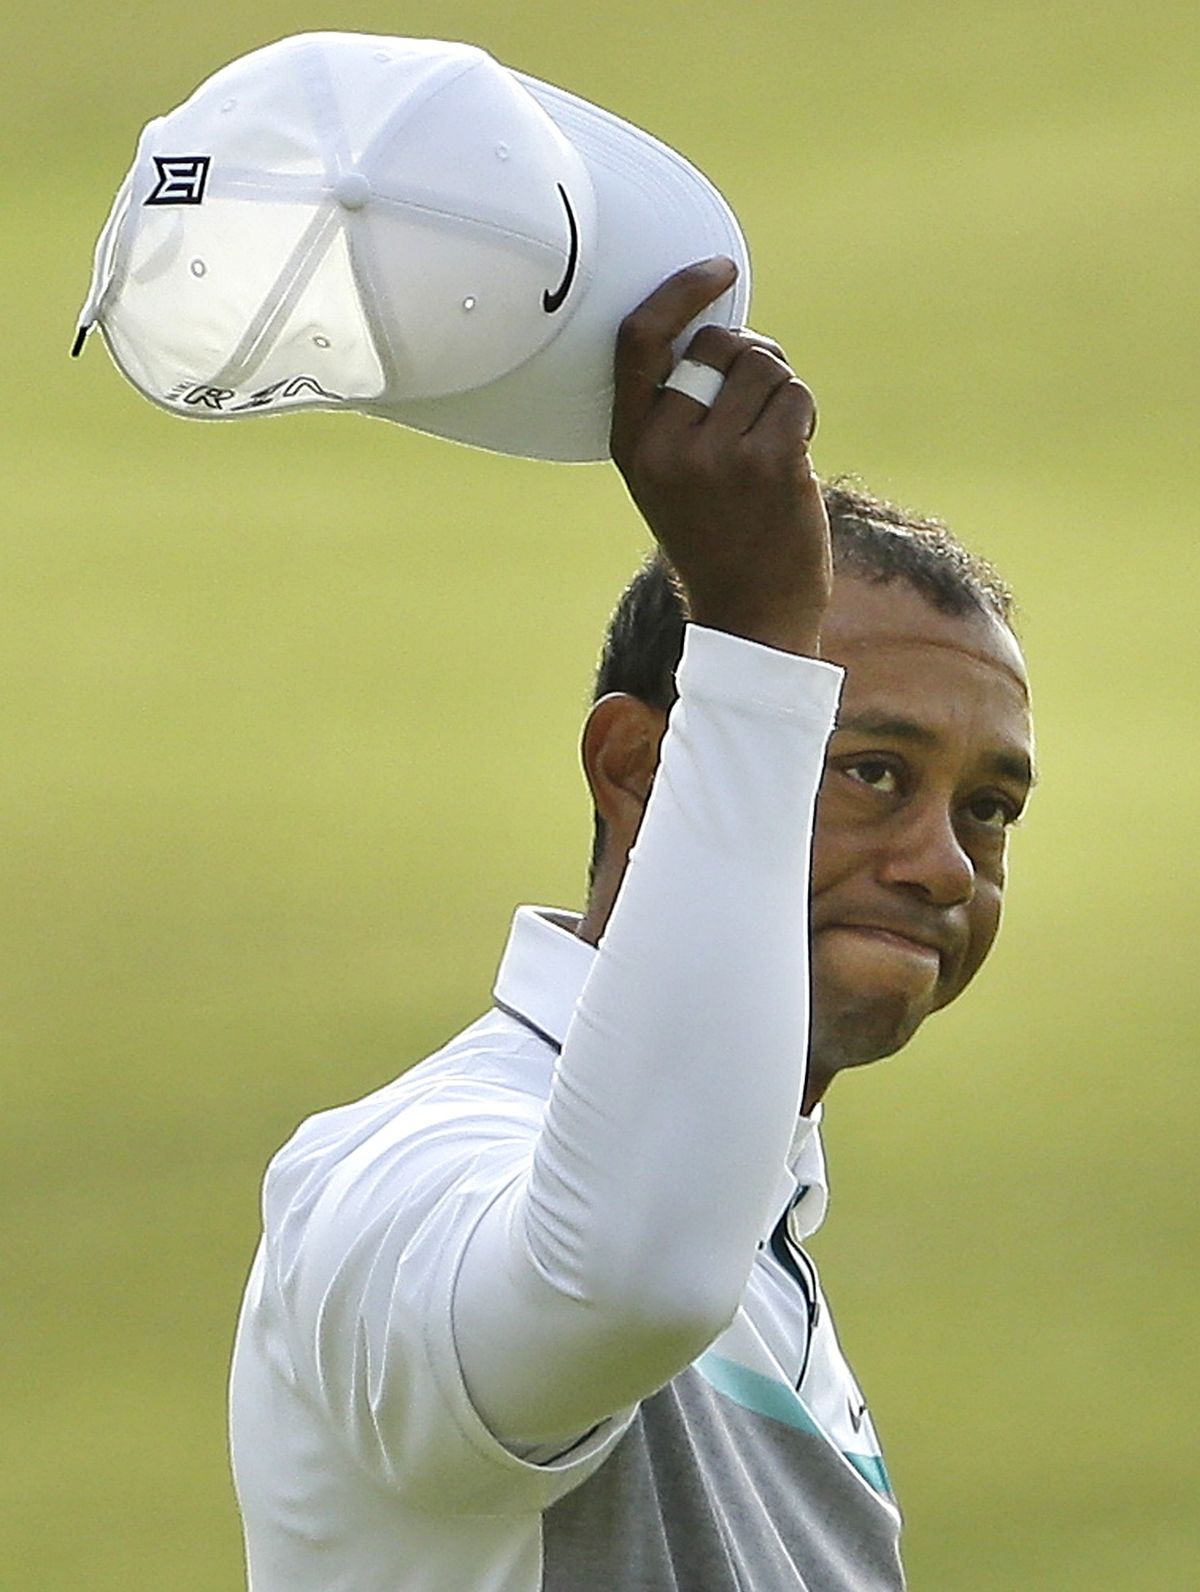 Tiger Woods shot 75 in the second round at the Old Course, St. Andrews, Scotland on Saturday for a 151 total, his worst 36-hole score in the British Open. (AP)